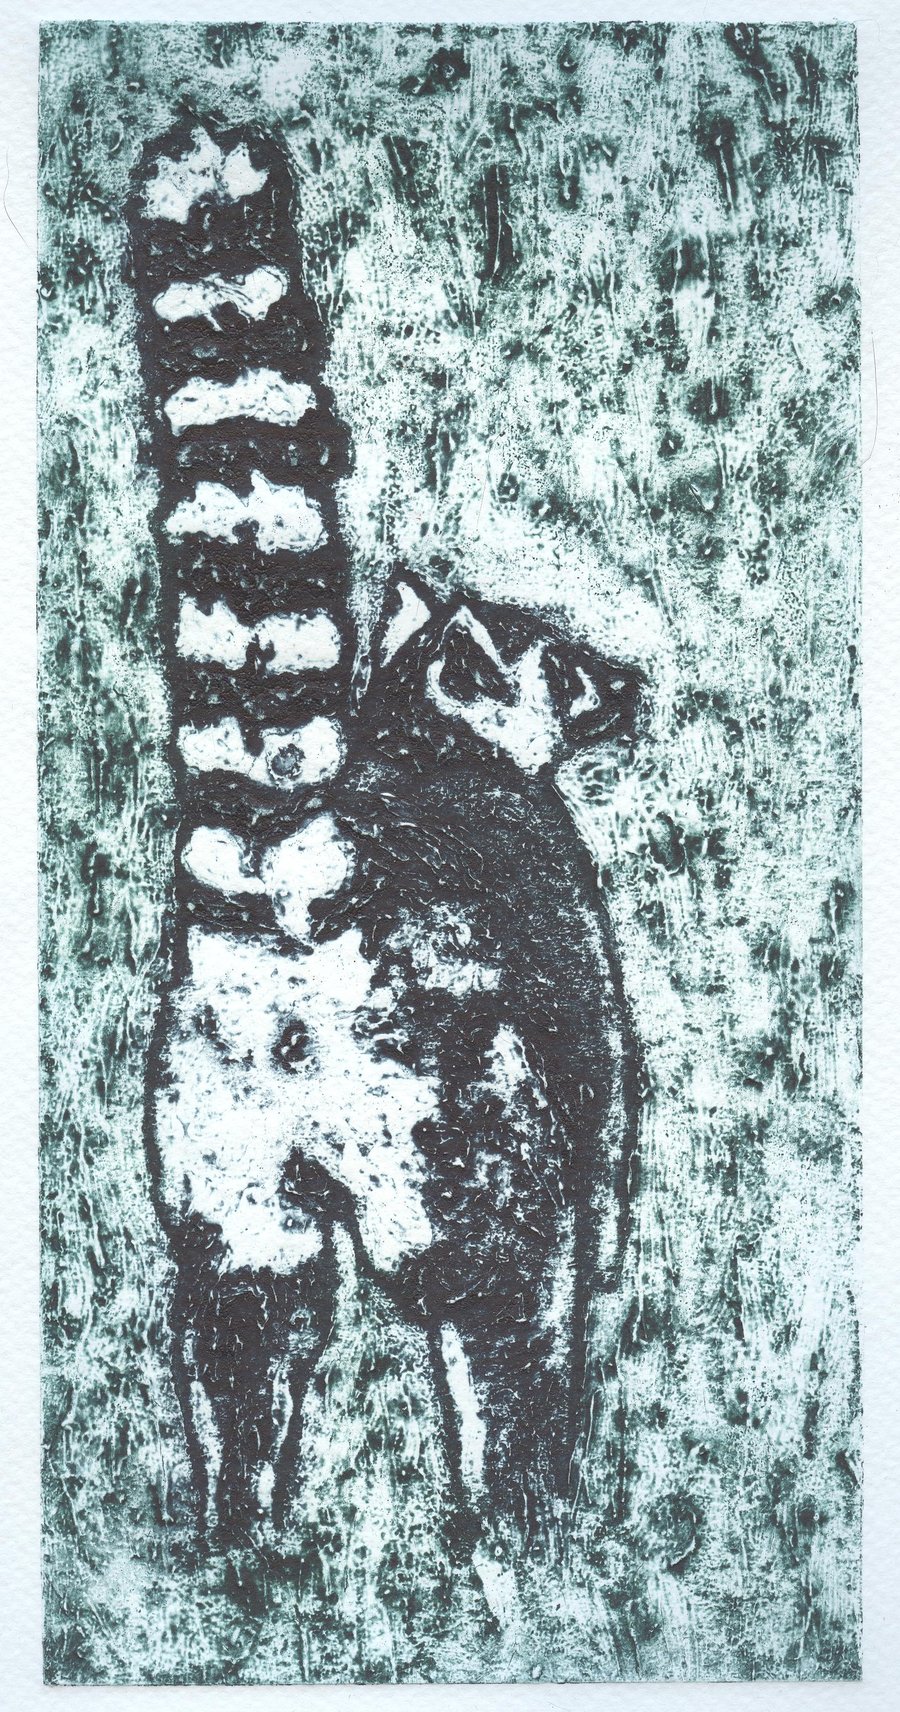 Ring Tailed Lemur 2 Limited Edition Collagraph Print